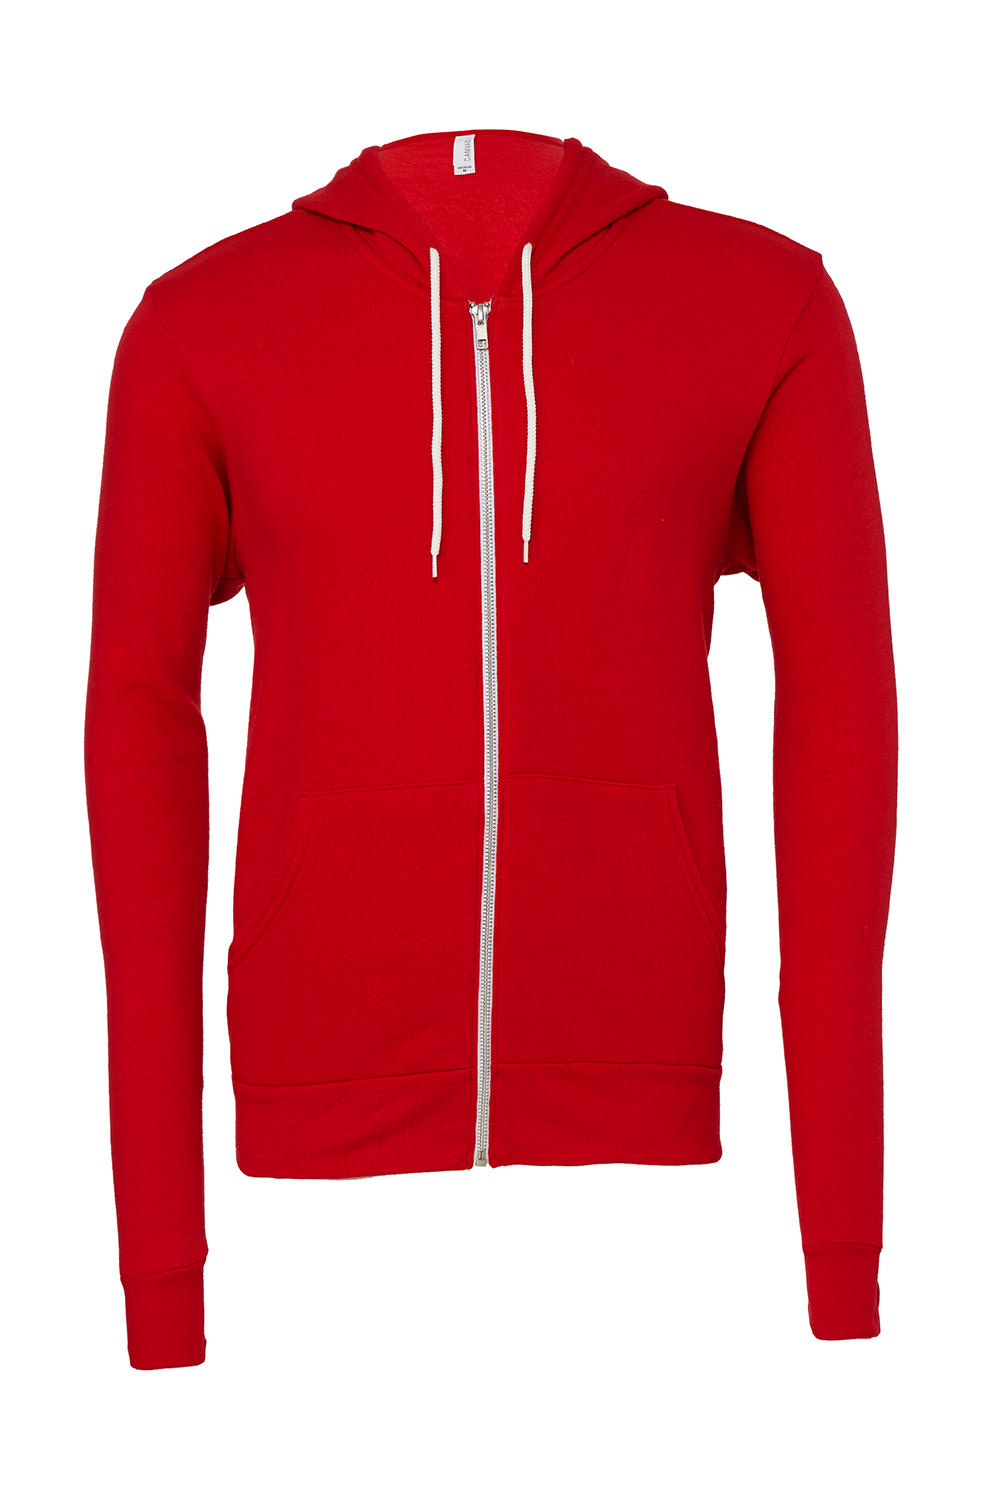  Unisex Poly-Cotton Full Zip Hoodie in Farbe Red